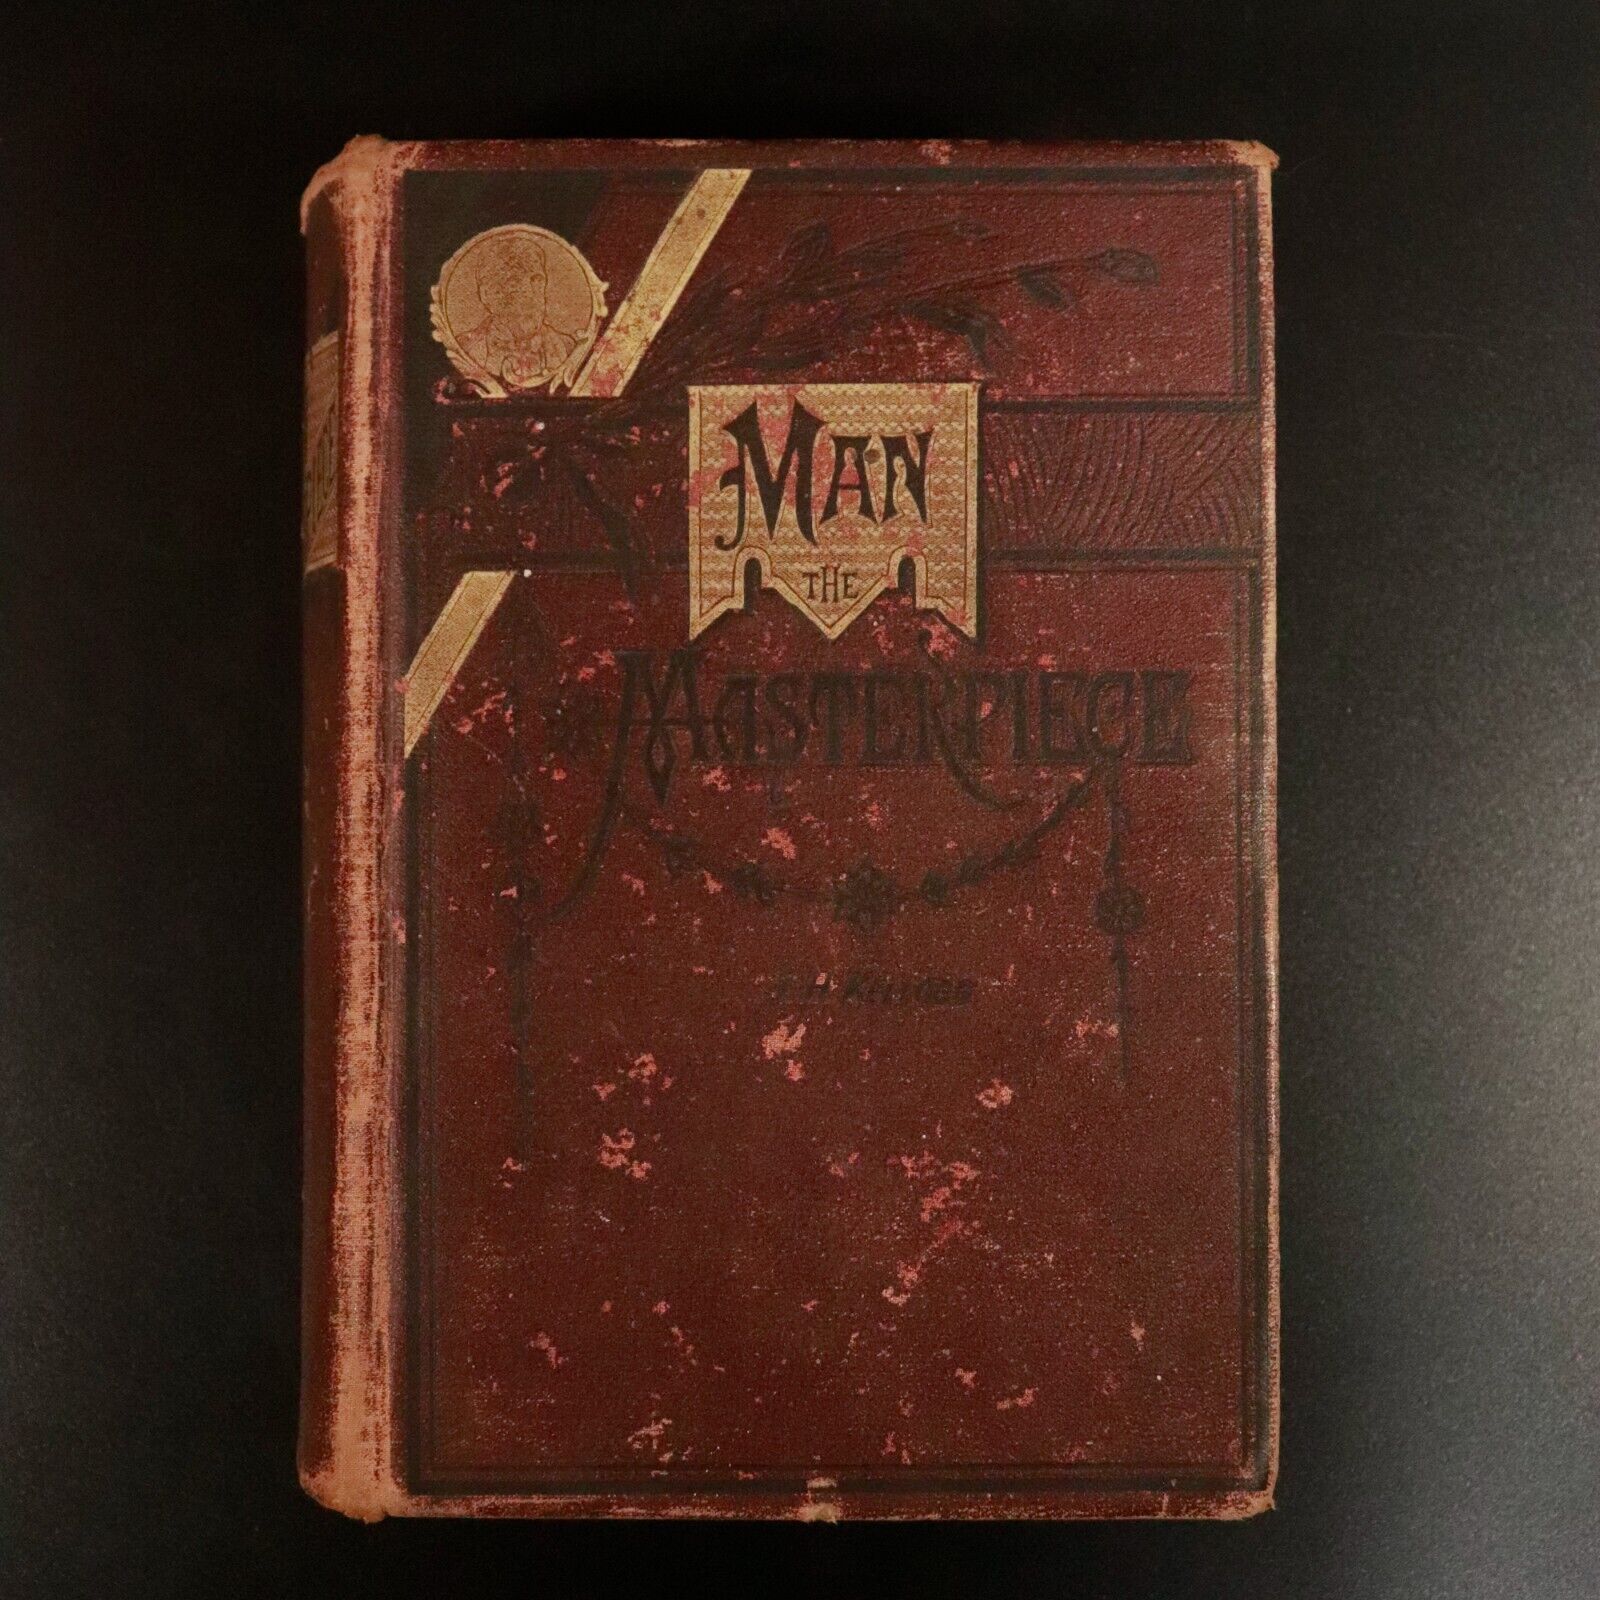 1886 Man The Masterpiece by J.H. Kellogg Illustrated Antiquarian Medical Book